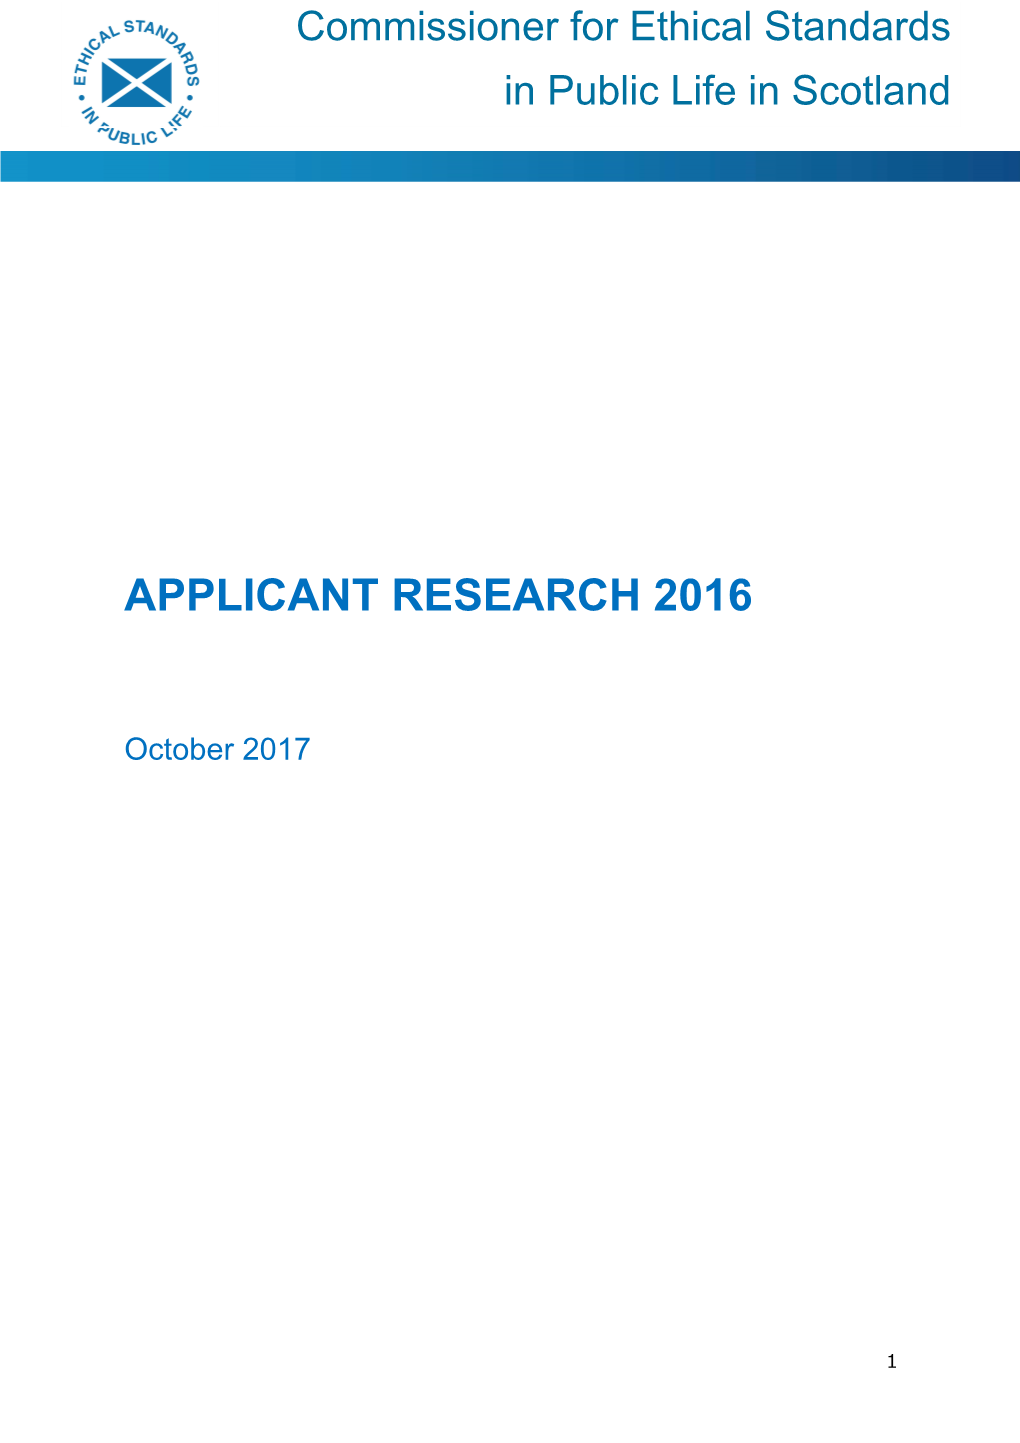 Applicant Research 2016